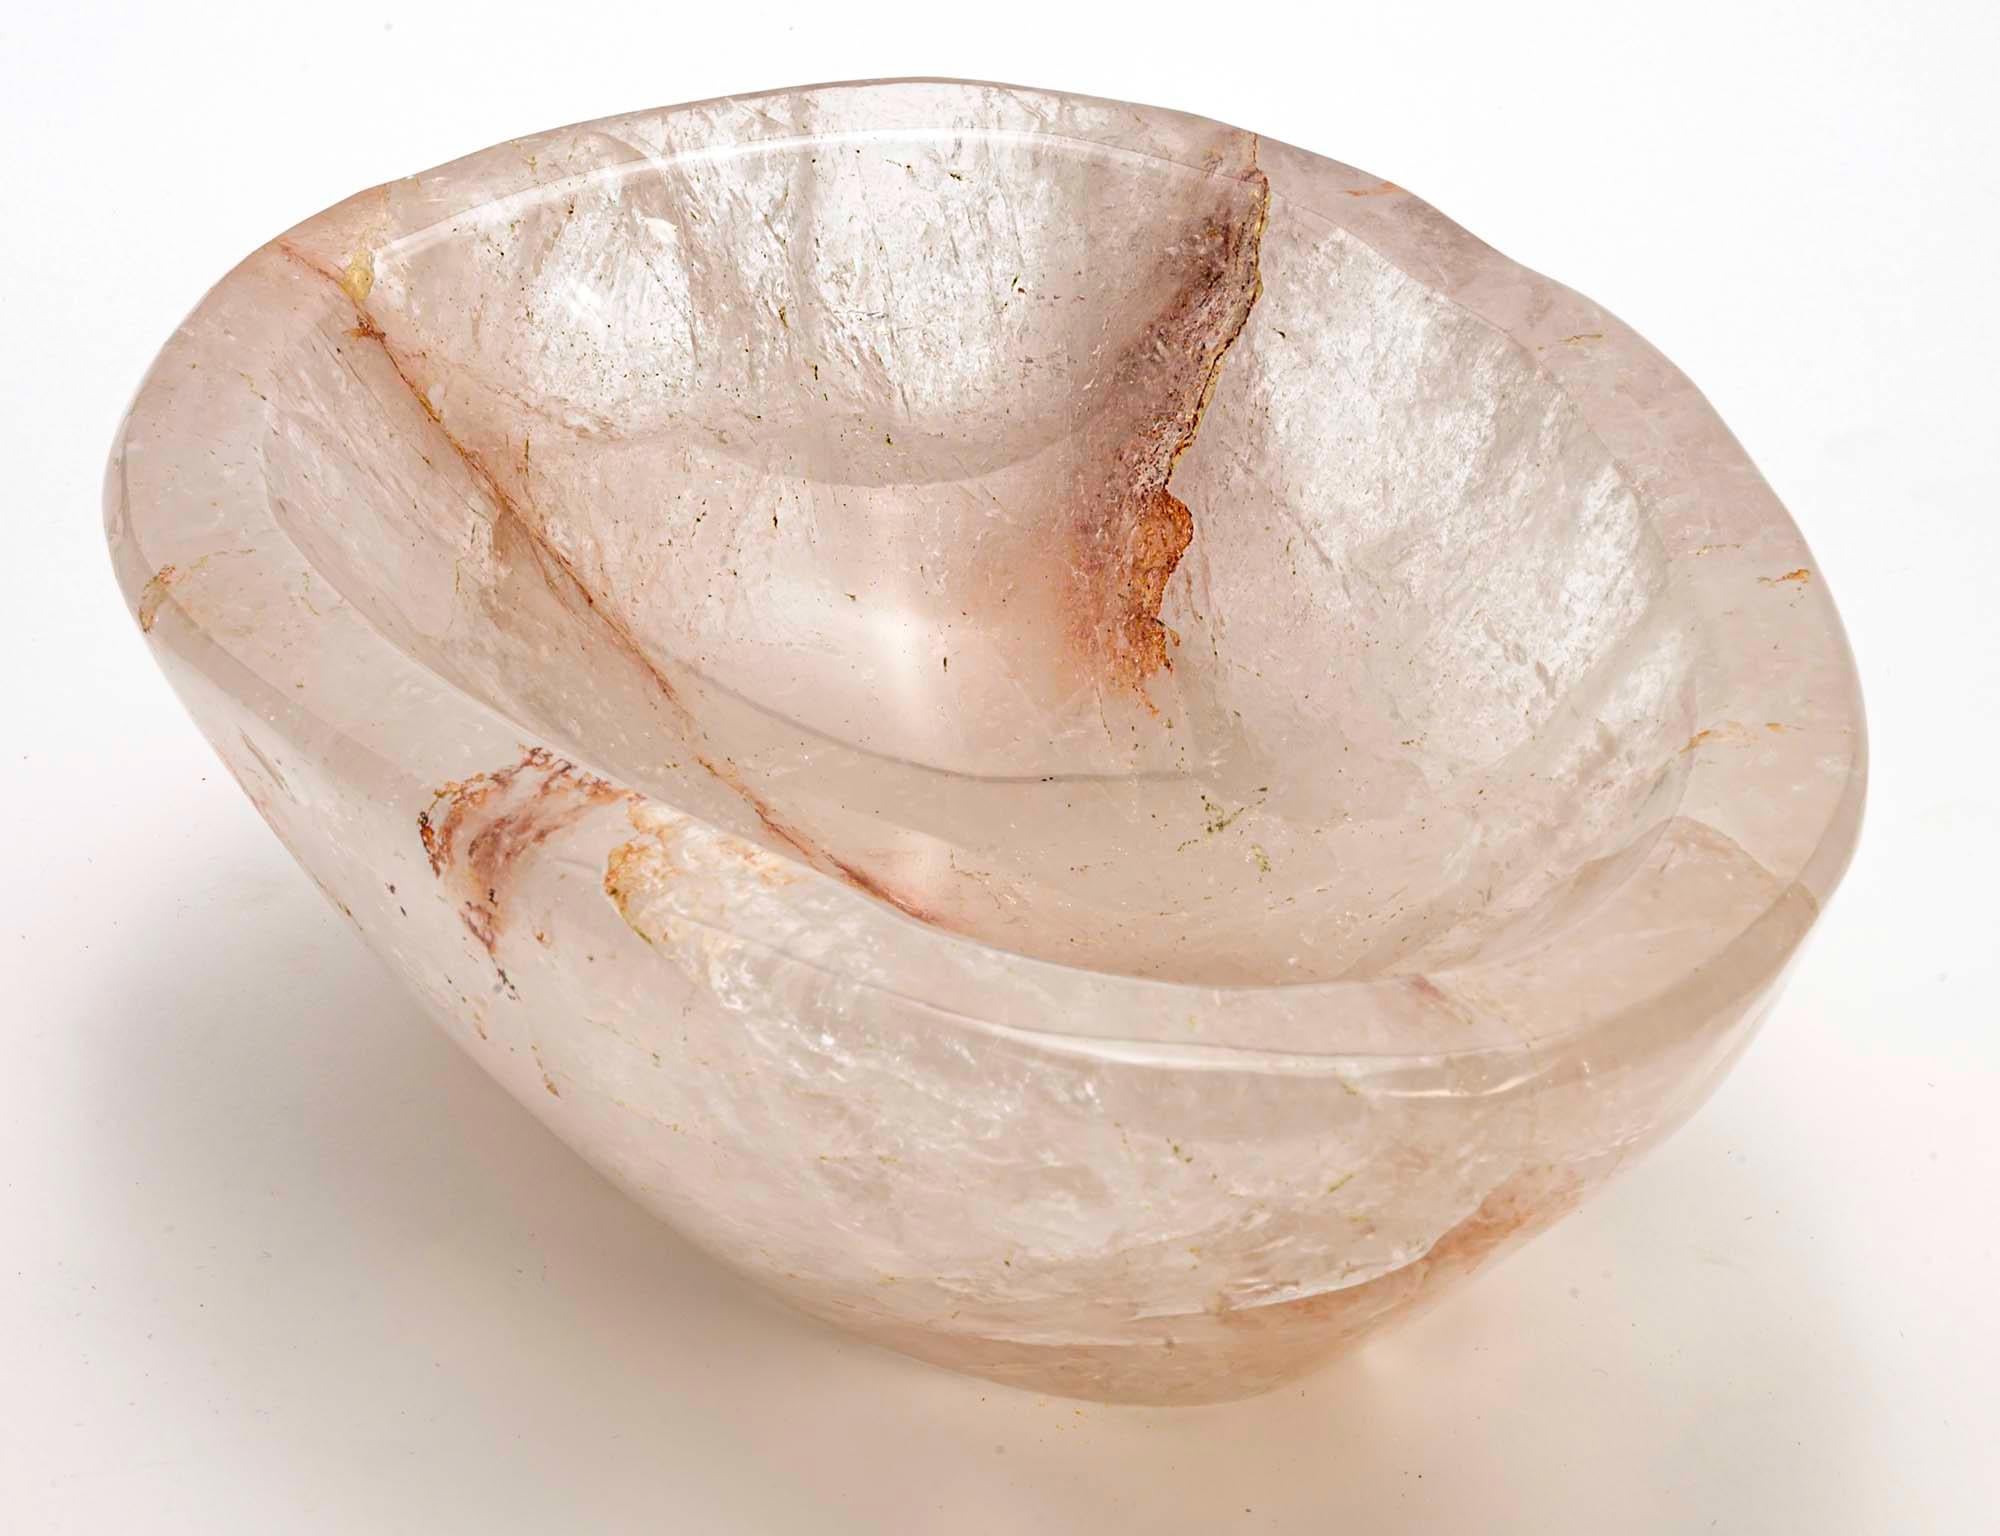 Organic shape, natural polished rock crystal quartz bowl. Tinged rose colored veins giving a beautiful warm glow. Large heavy bowl. 11.5 wide. Very decorative and useful display.